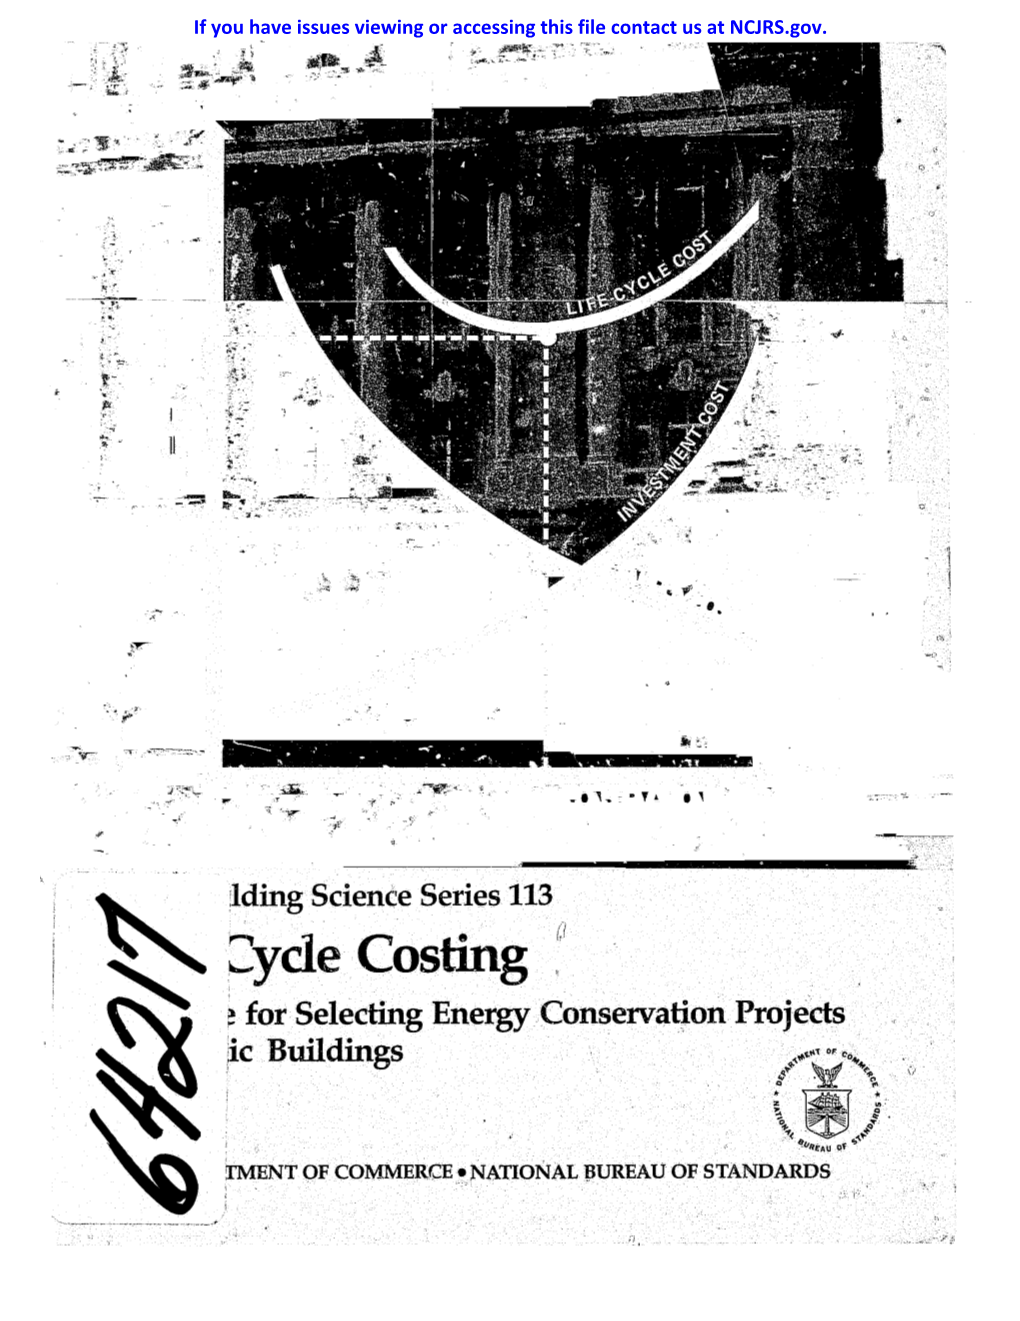 2Ycle Costing ~ for Selecting Energy Conservation Projects ~C Buildings